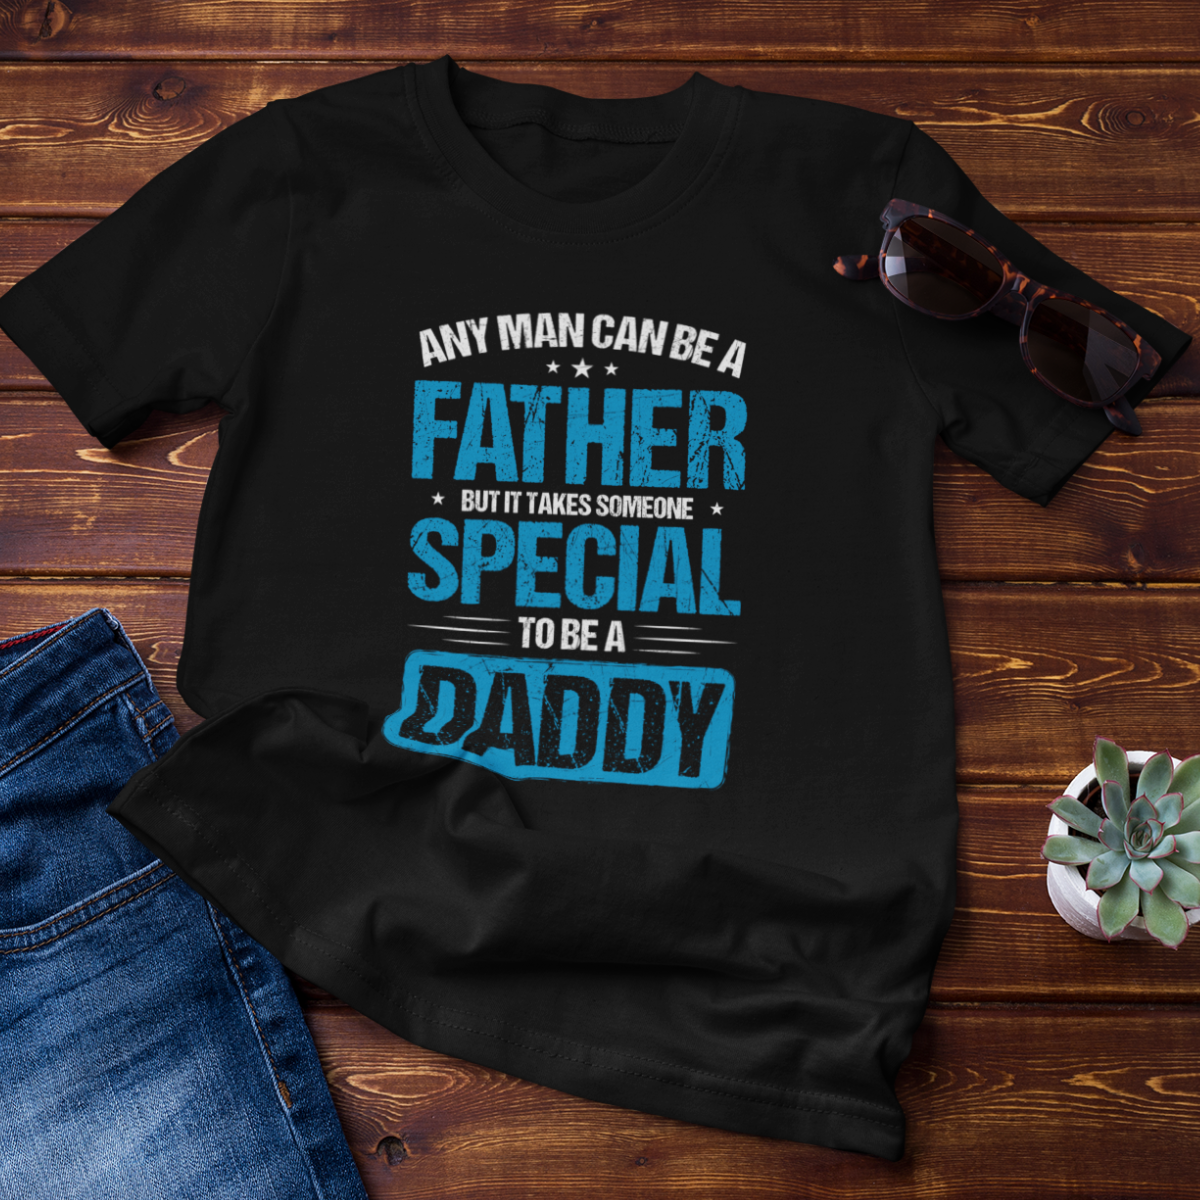 Dad T-shirt - ANY MAN CAN BE A FATHER, BUT IT TAKES SOMEONE SPECIAL TO BE A DADDY